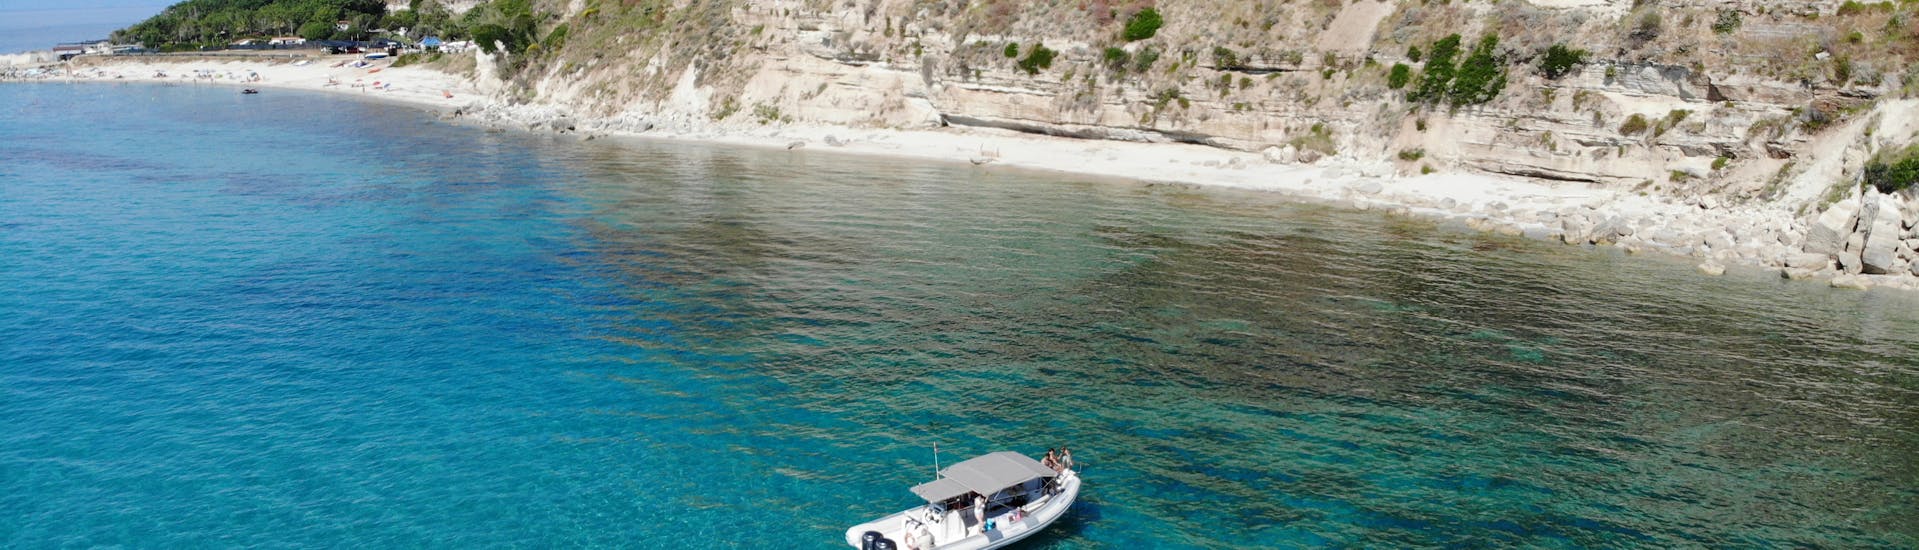 Boat from TropeaSub seen from above during the private RIB boat trip from Tropea to Capo Vaticano with snorkeling.